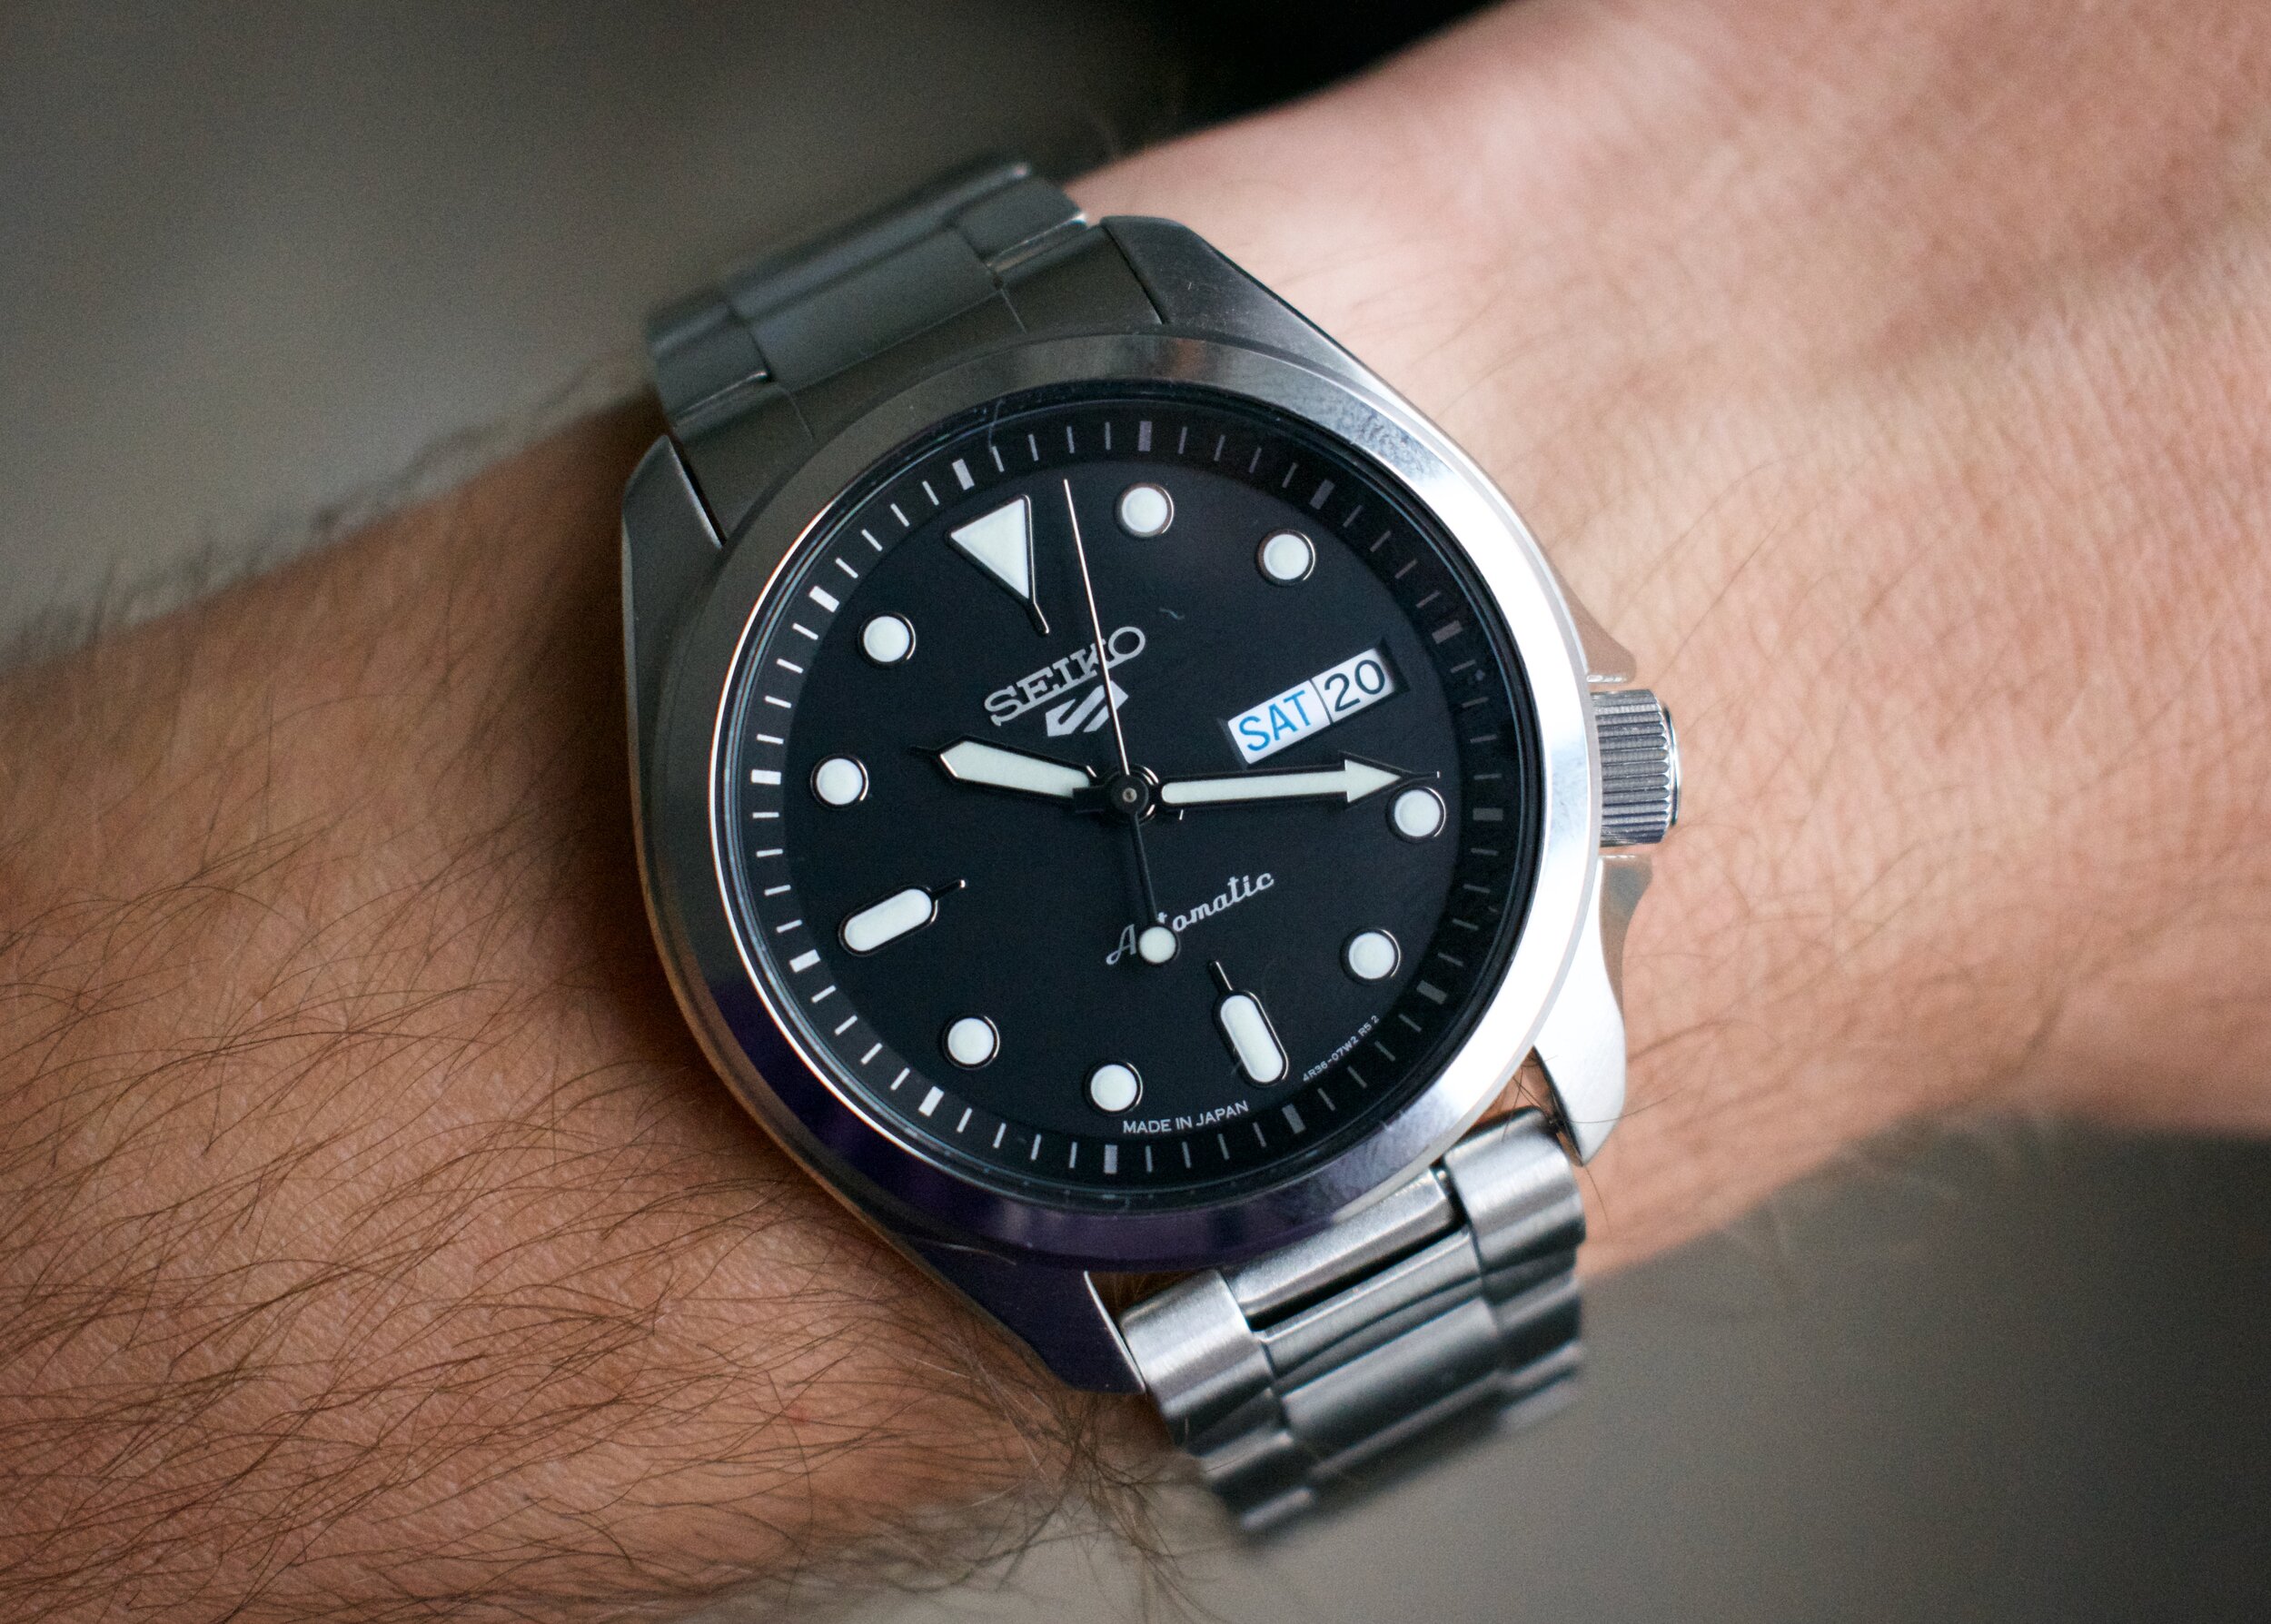 Seiko 5 Watches All Models on Sale, 53% OFF | www.vetyvet.com